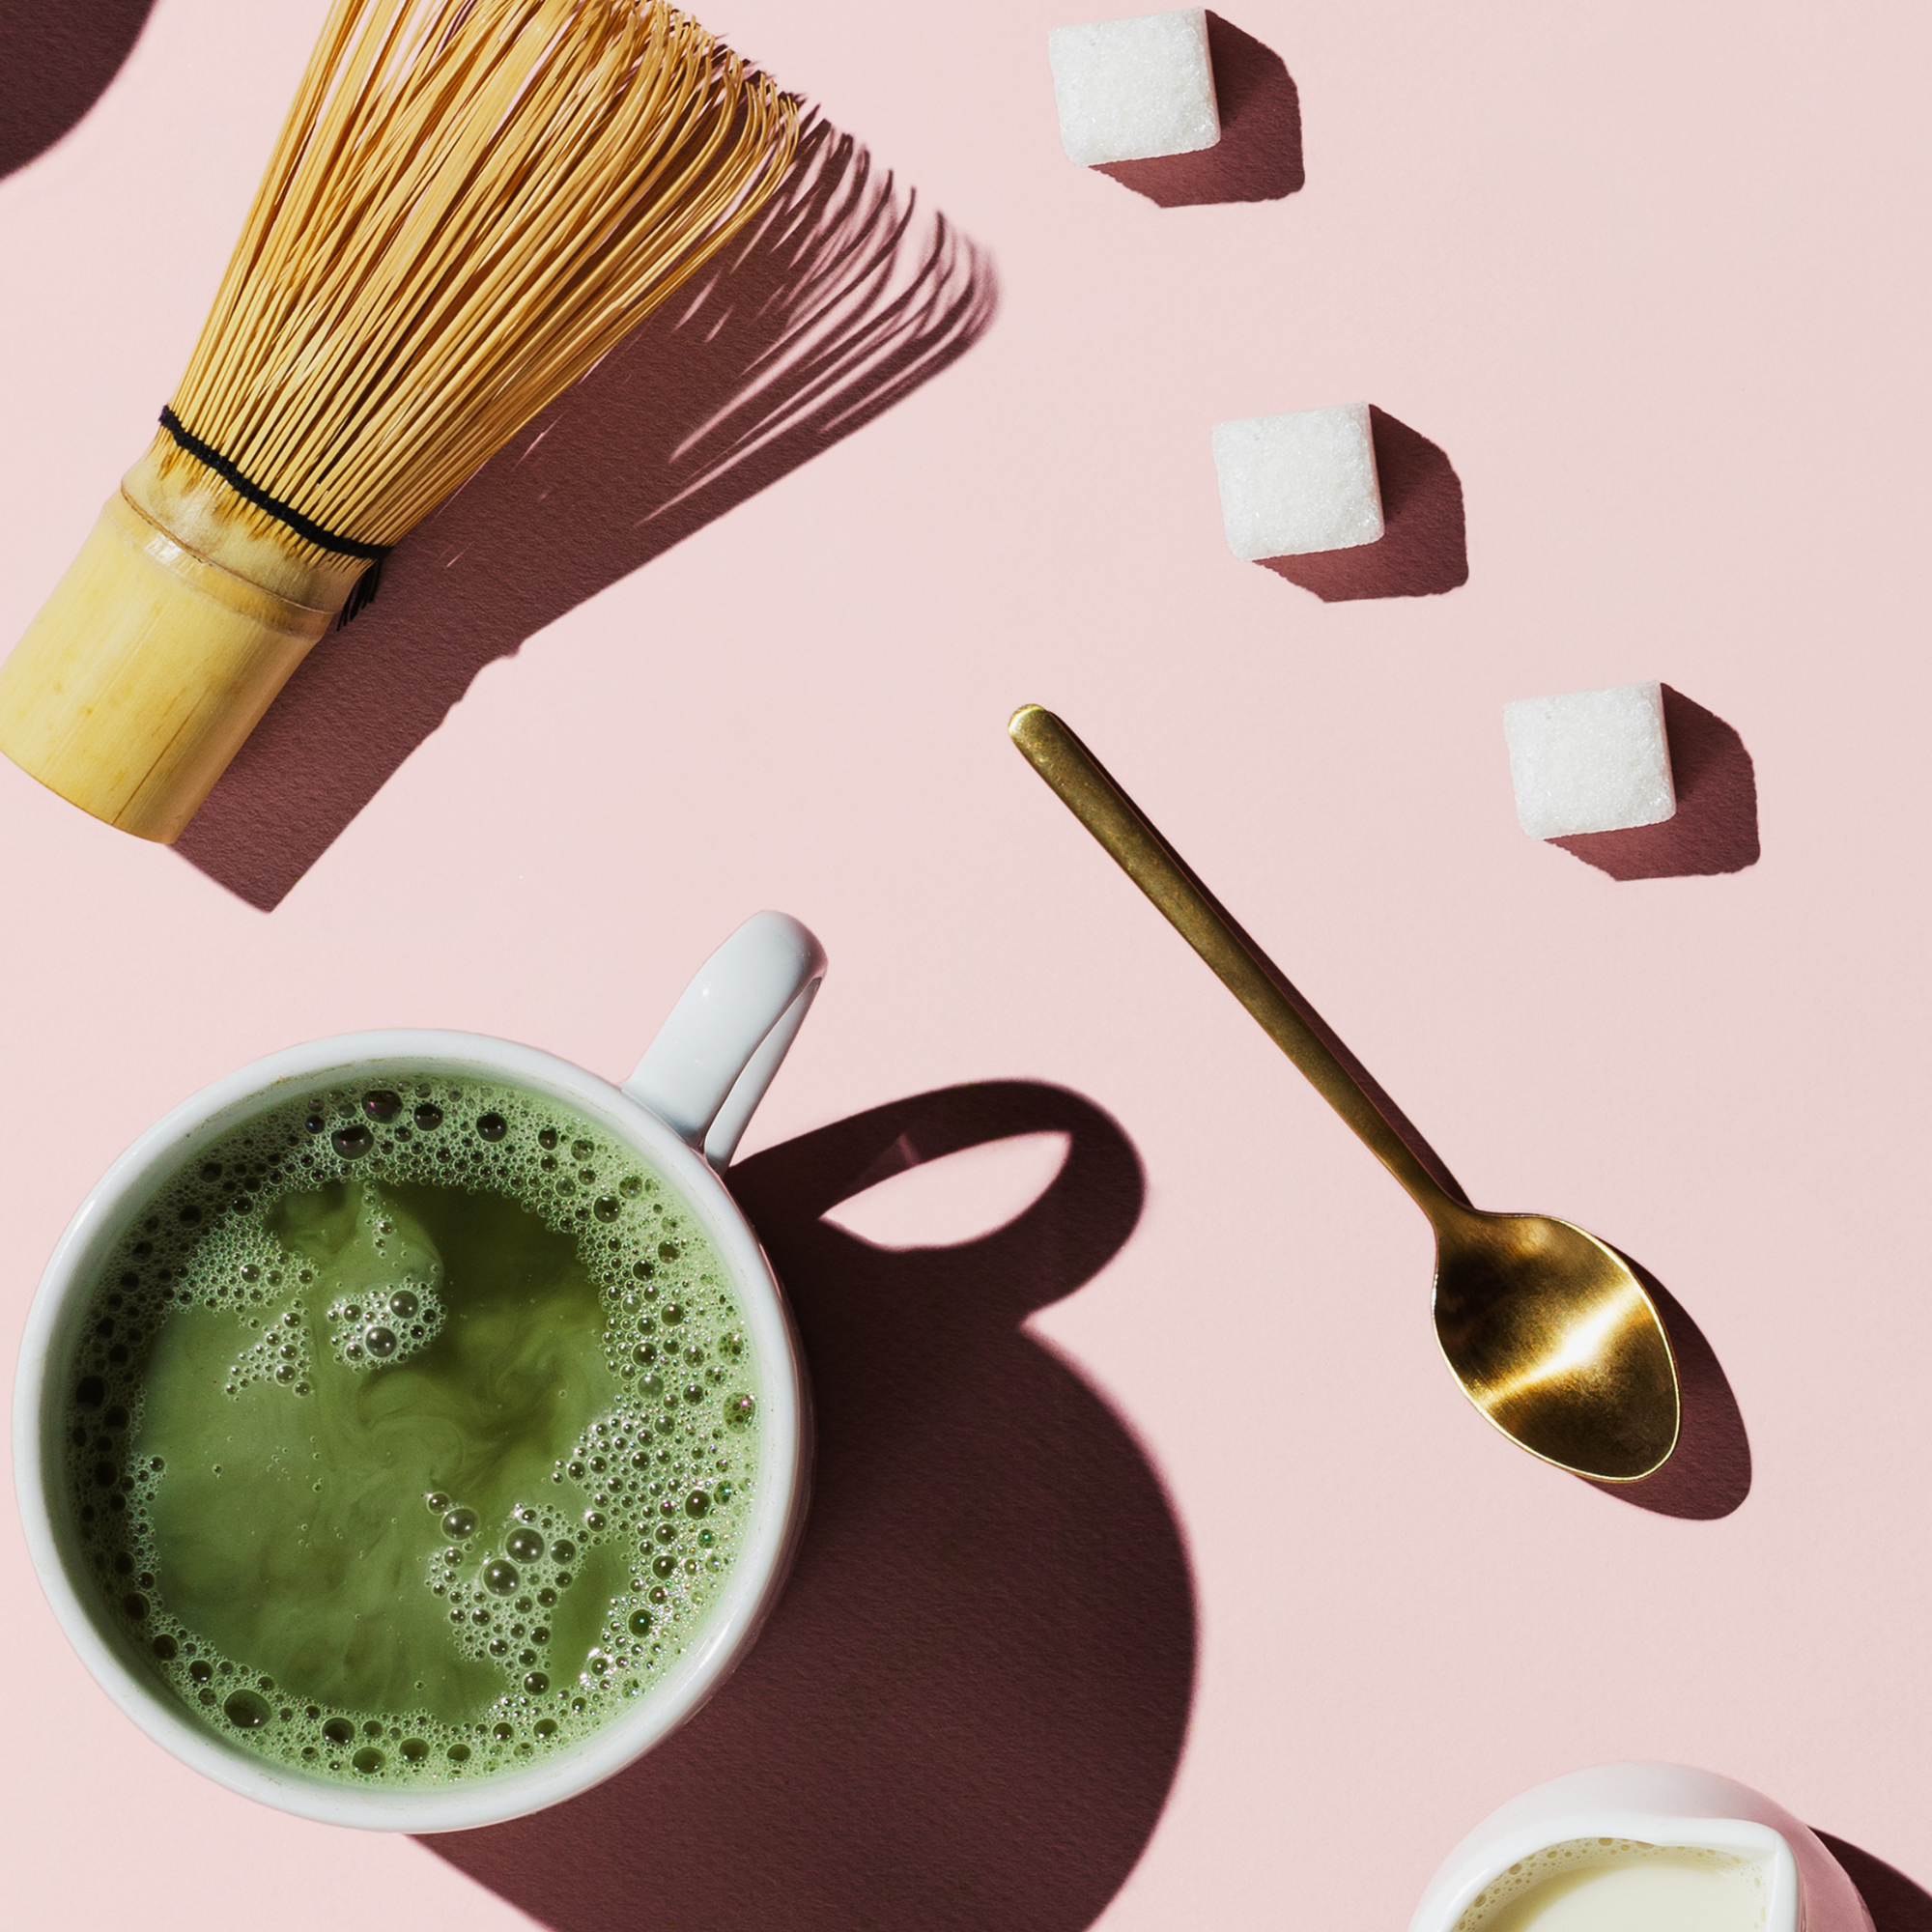 What is matcha supposed to taste like?